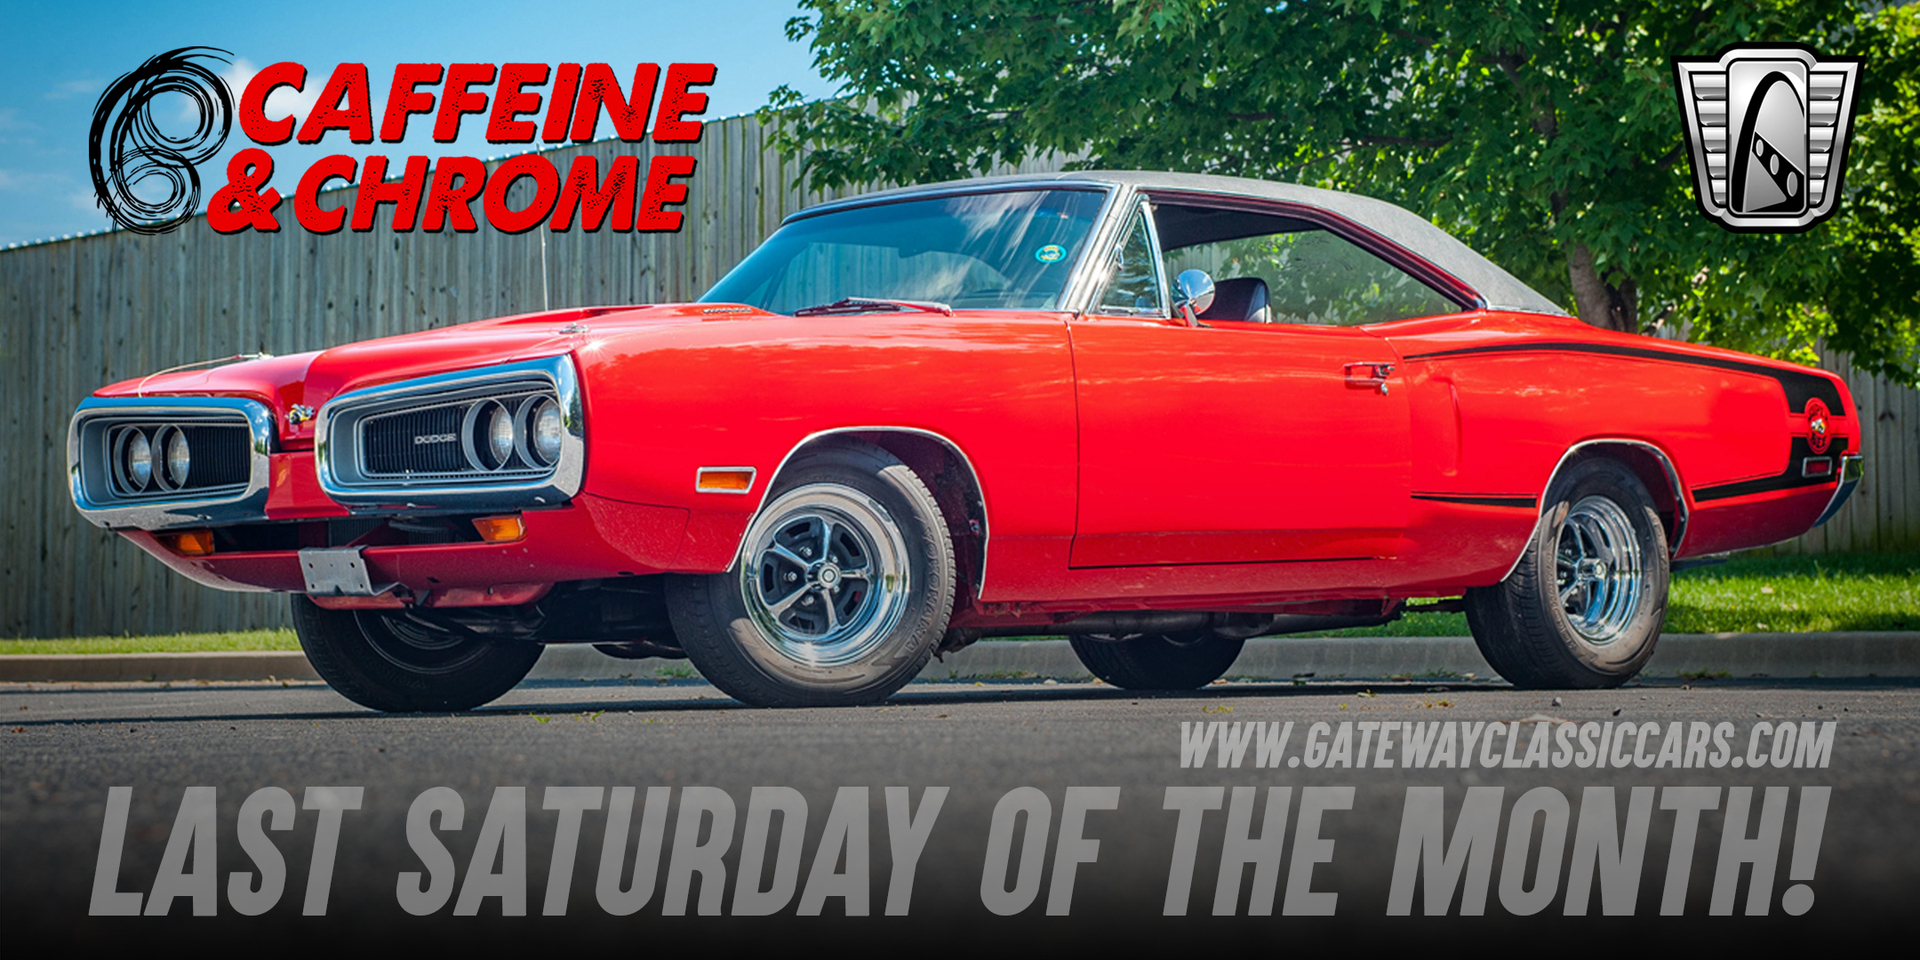 Caffeine and Chrome-Classic Cars and Coffee at Gateway Classic Cars of Nashville, La Vergne, Tennessee, United States